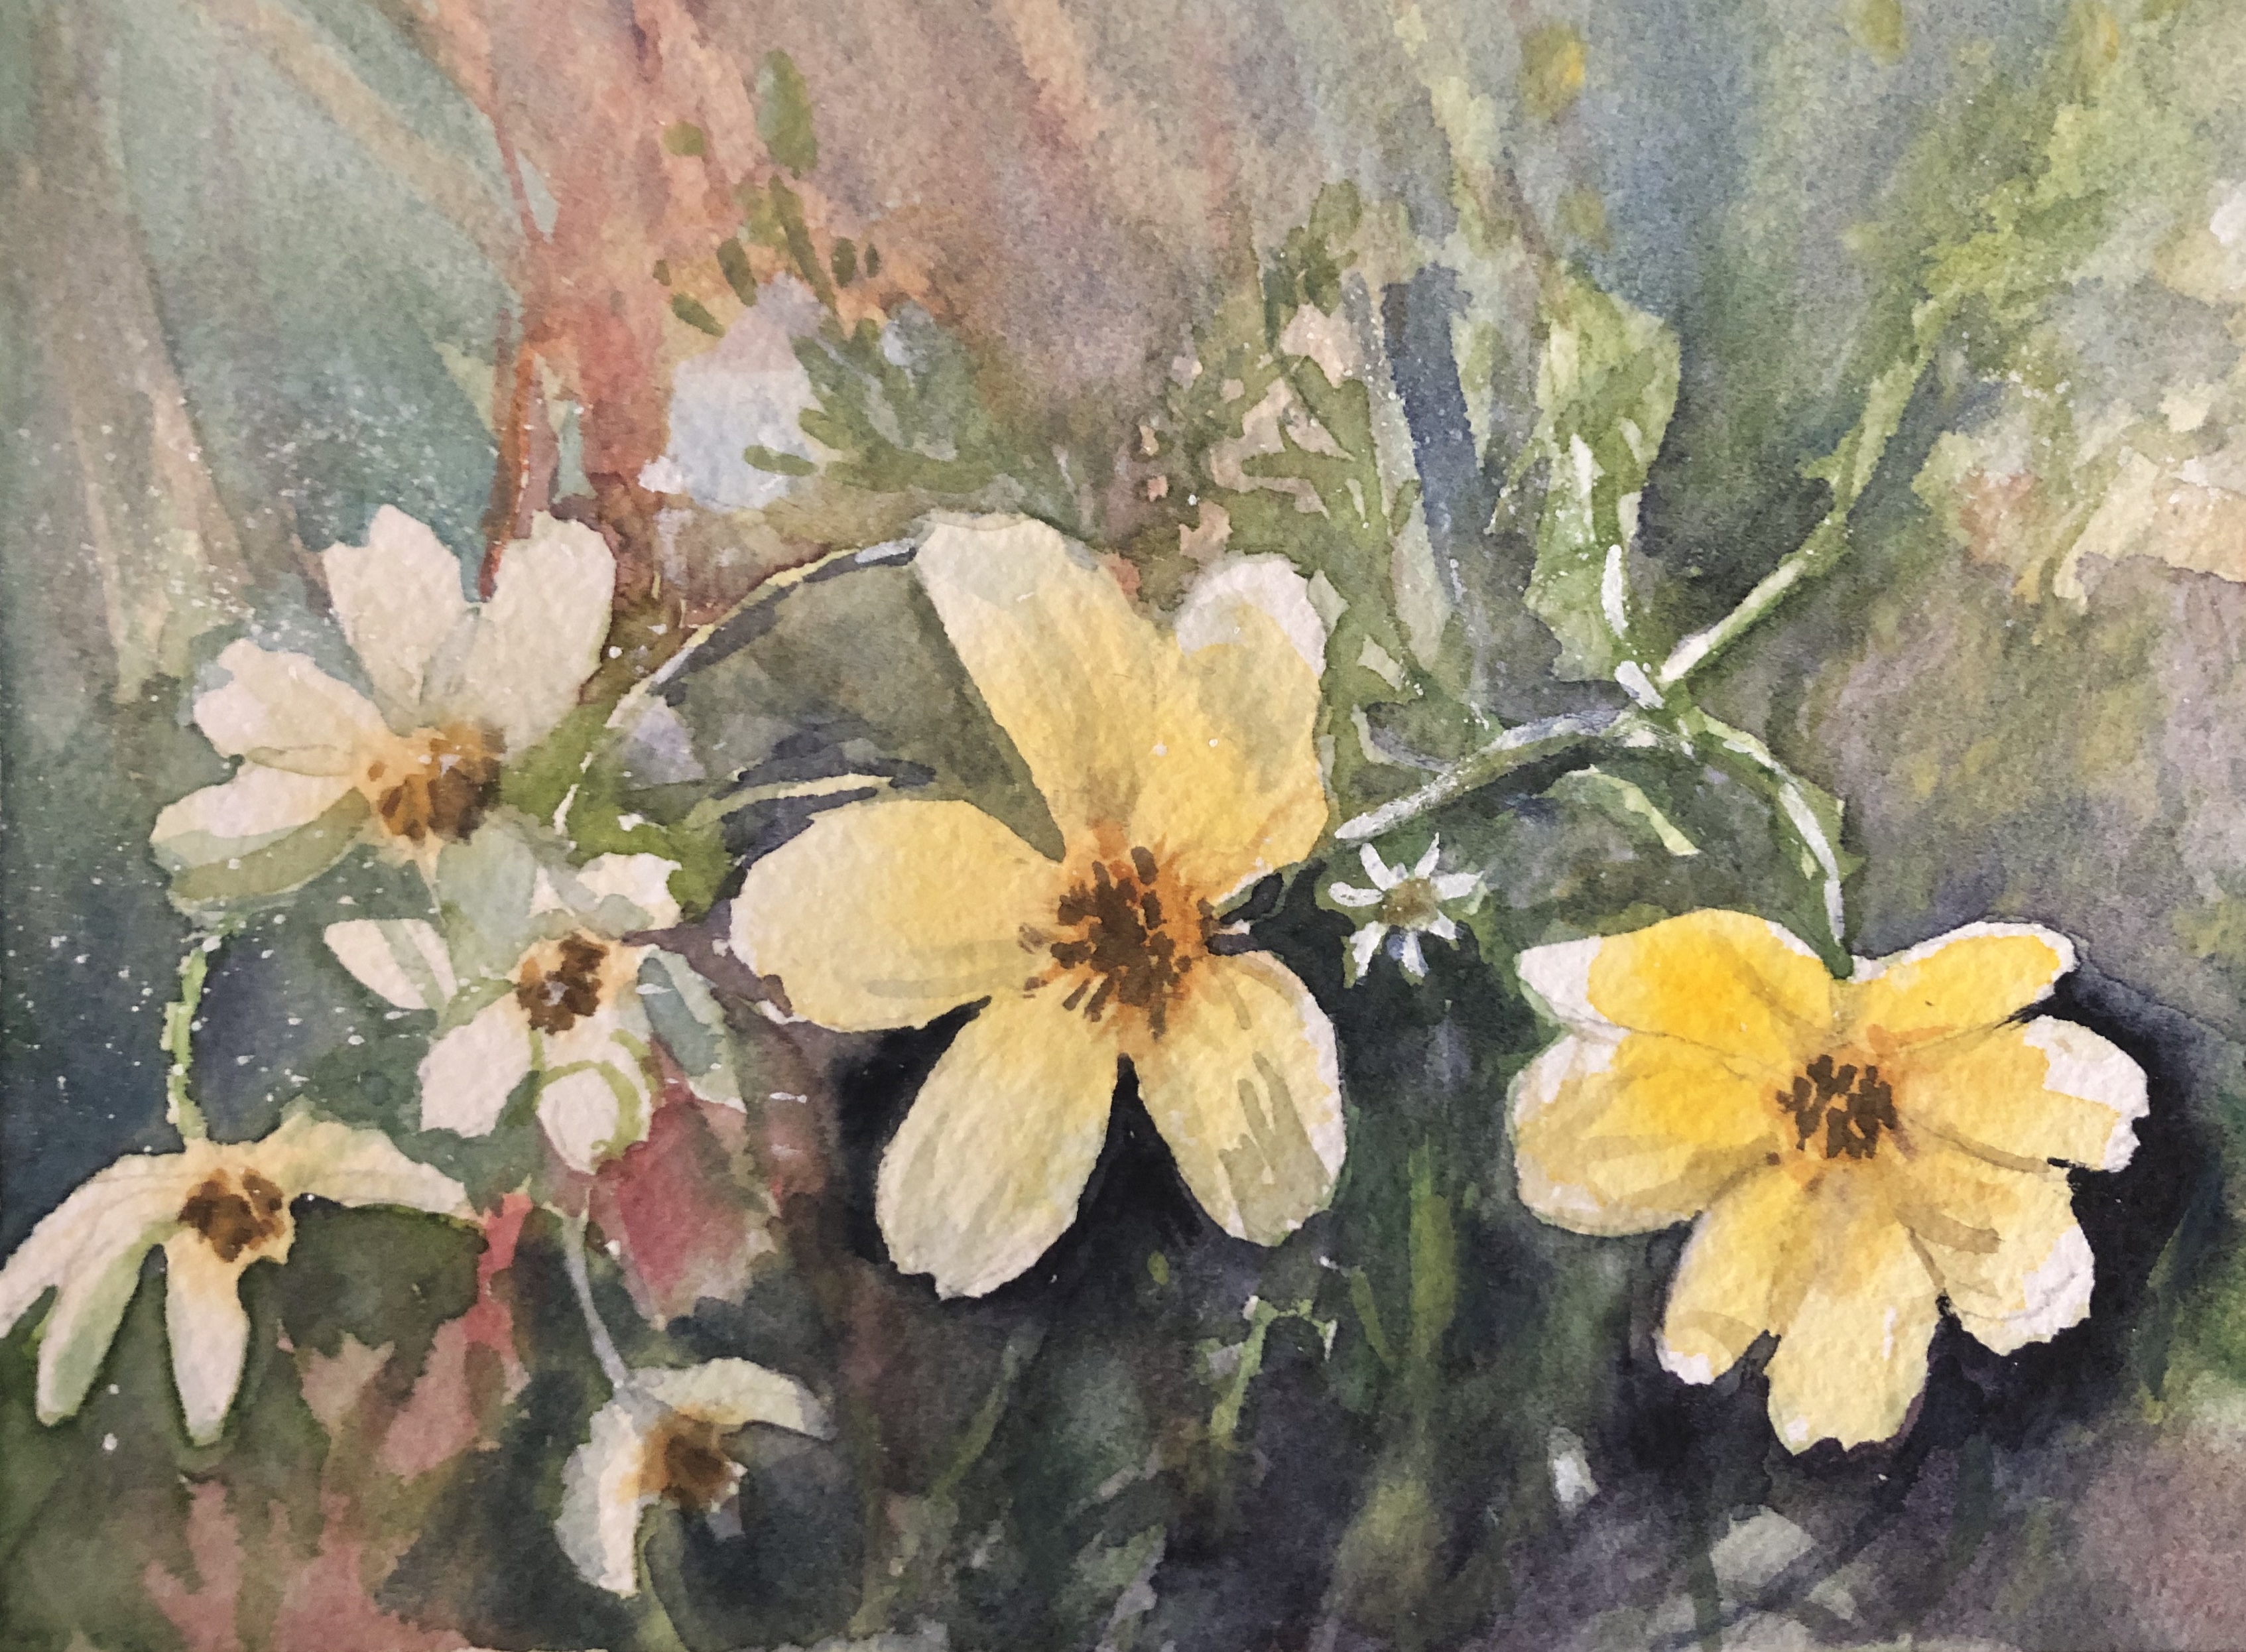 From Mom's Garden
Watercolor
7" X 5"
$100.